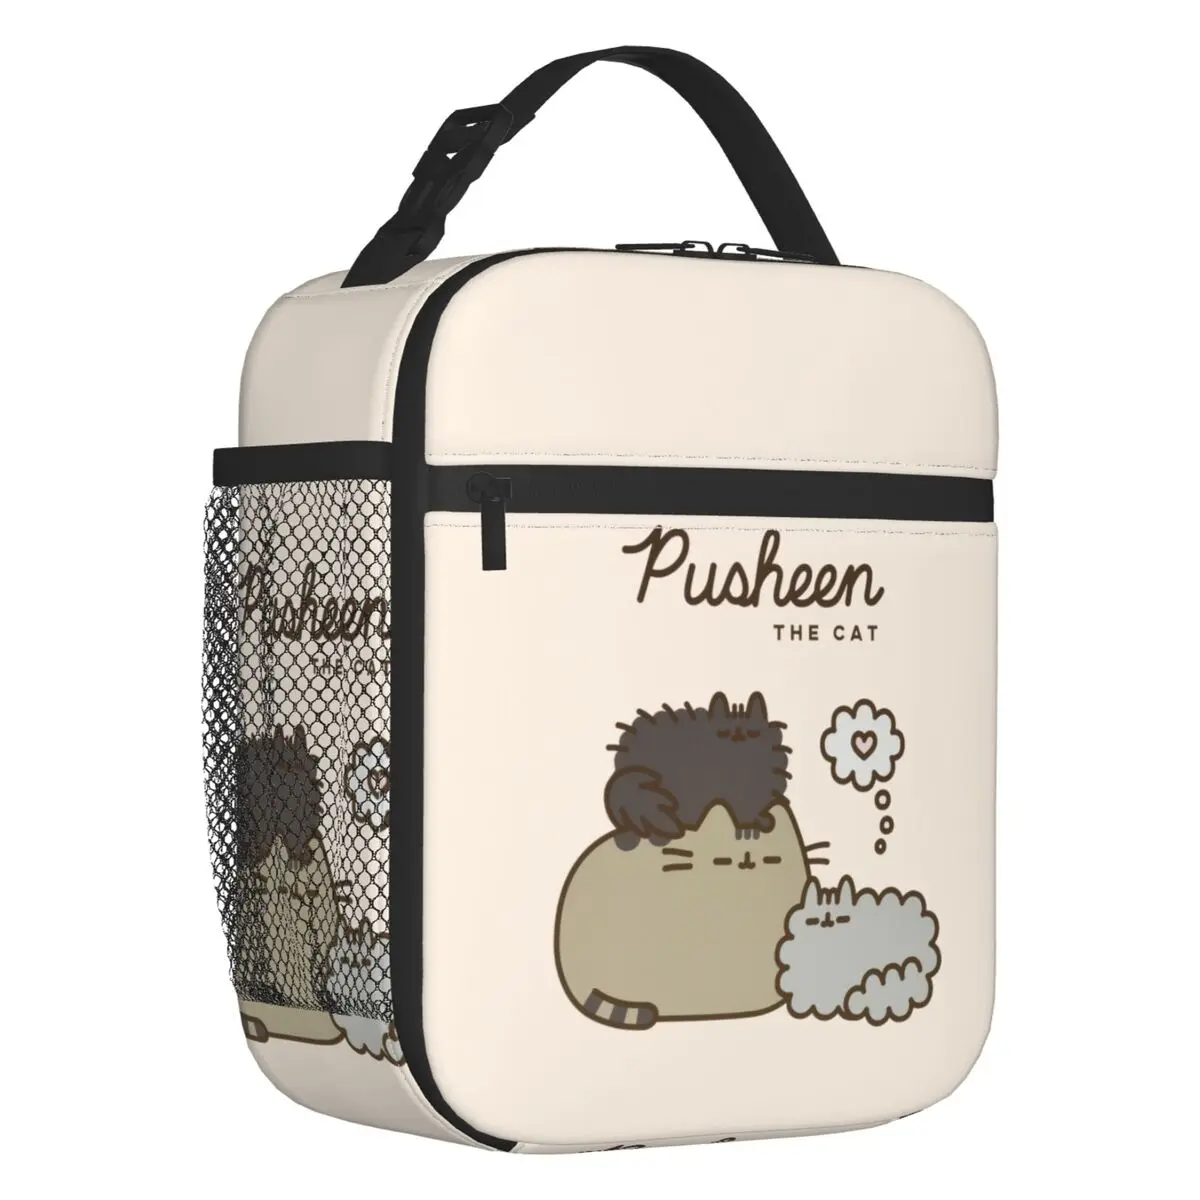 Pusheens Cat Insulated Lunch Bag for Camping Travel Tabby Catroon Pattern Leakproof Cooler Thermal Bento Box Women Kids